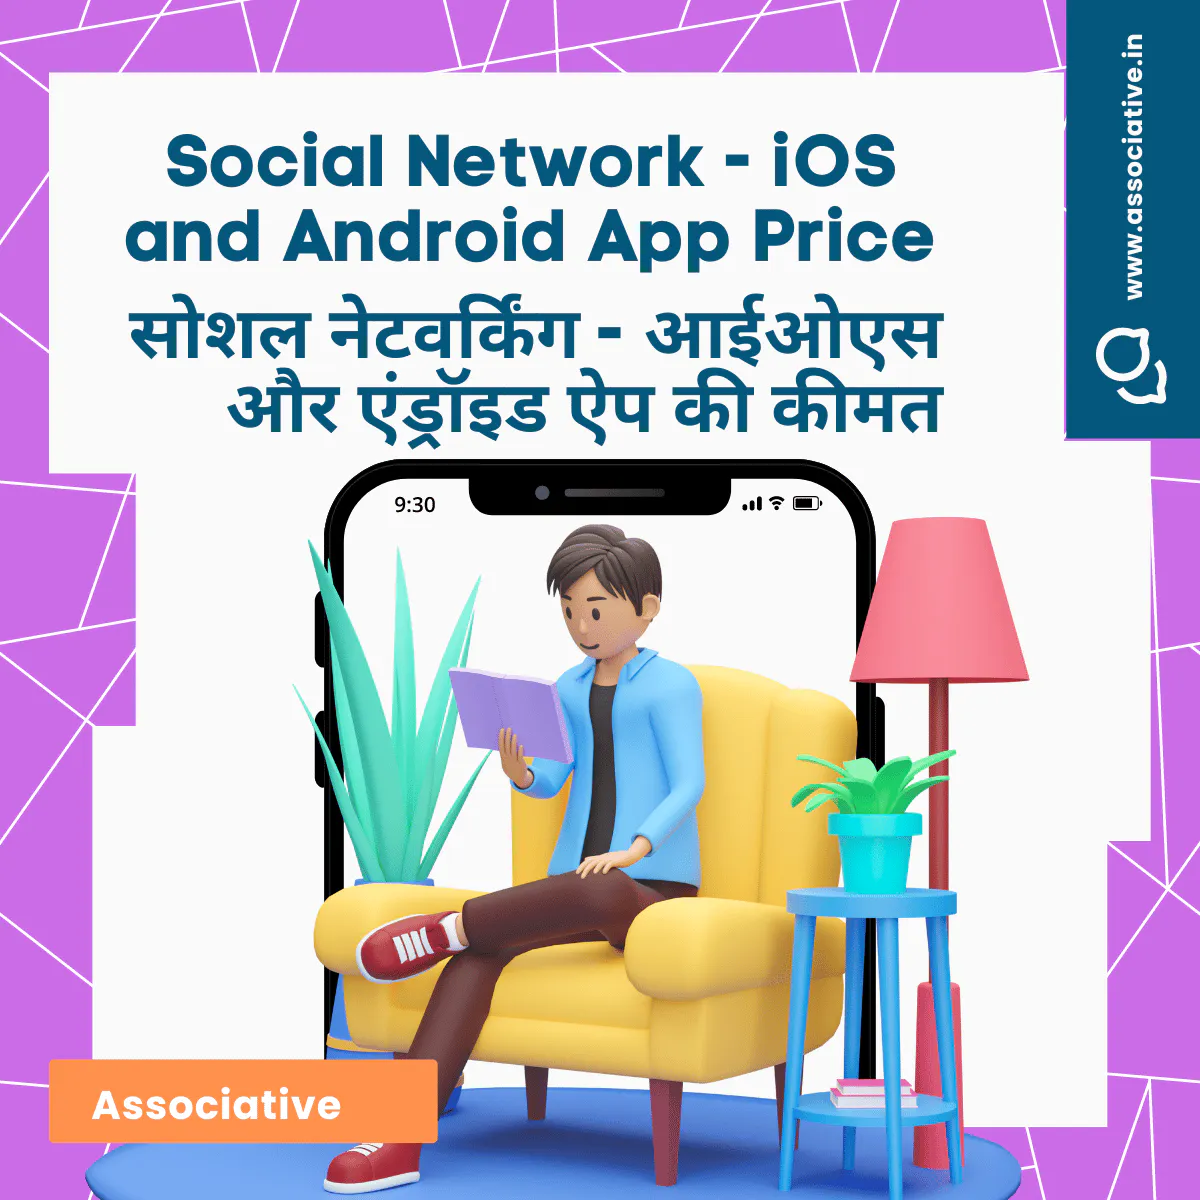 Social Network - iOS and Android App